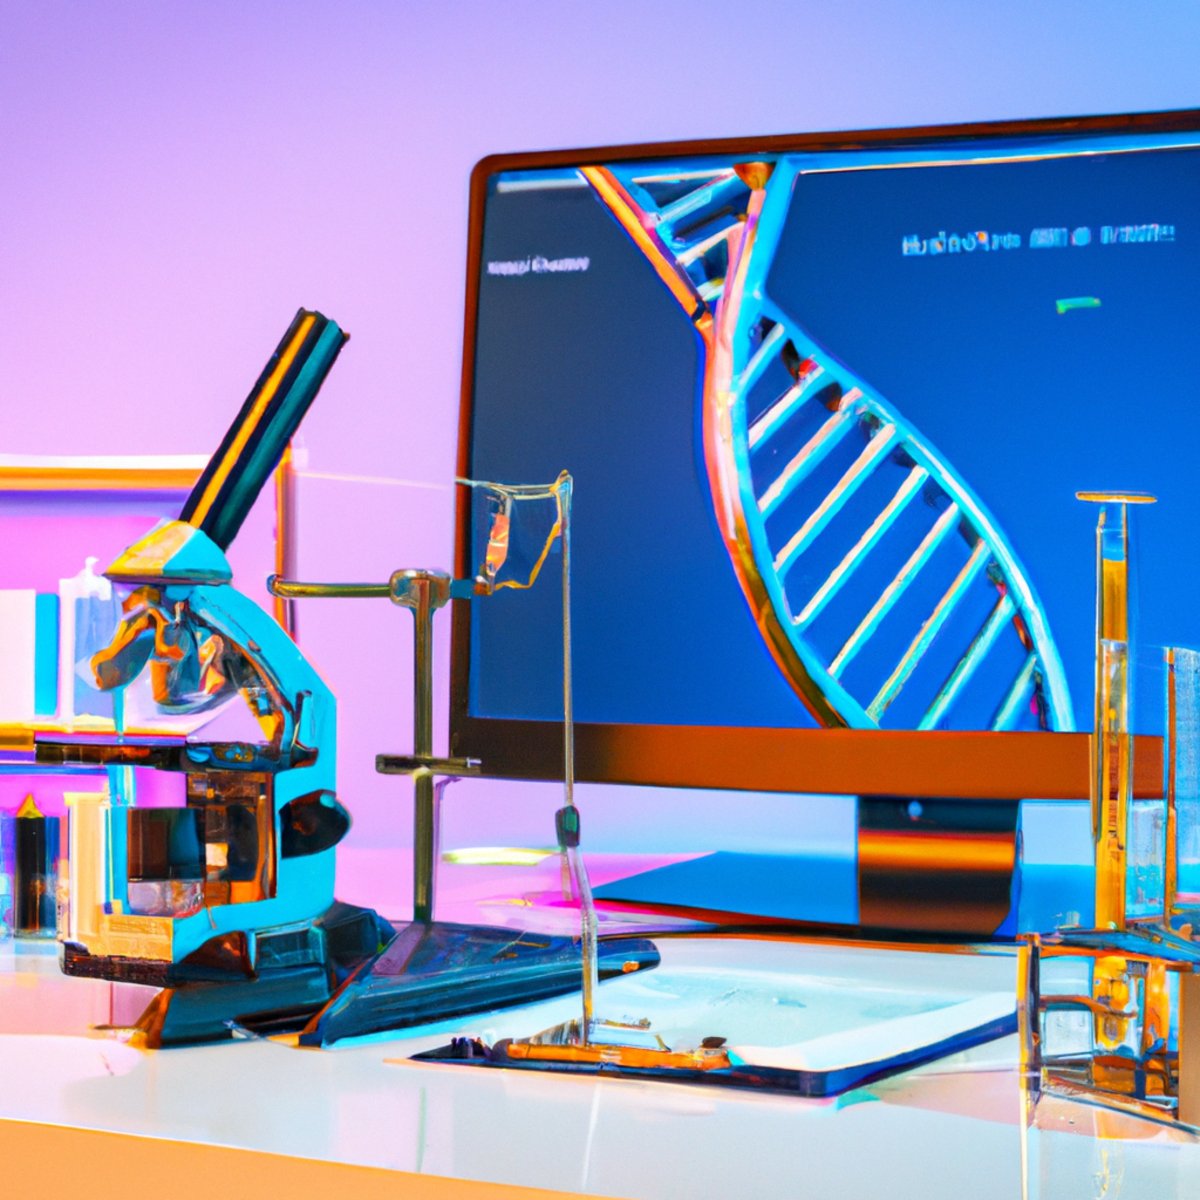 Close-up of laboratory: microscope focused on DNA double helix model, computer screen shows genetic sequencing analysis of Hutchinson-Gilford Progeria Syndrome gene.